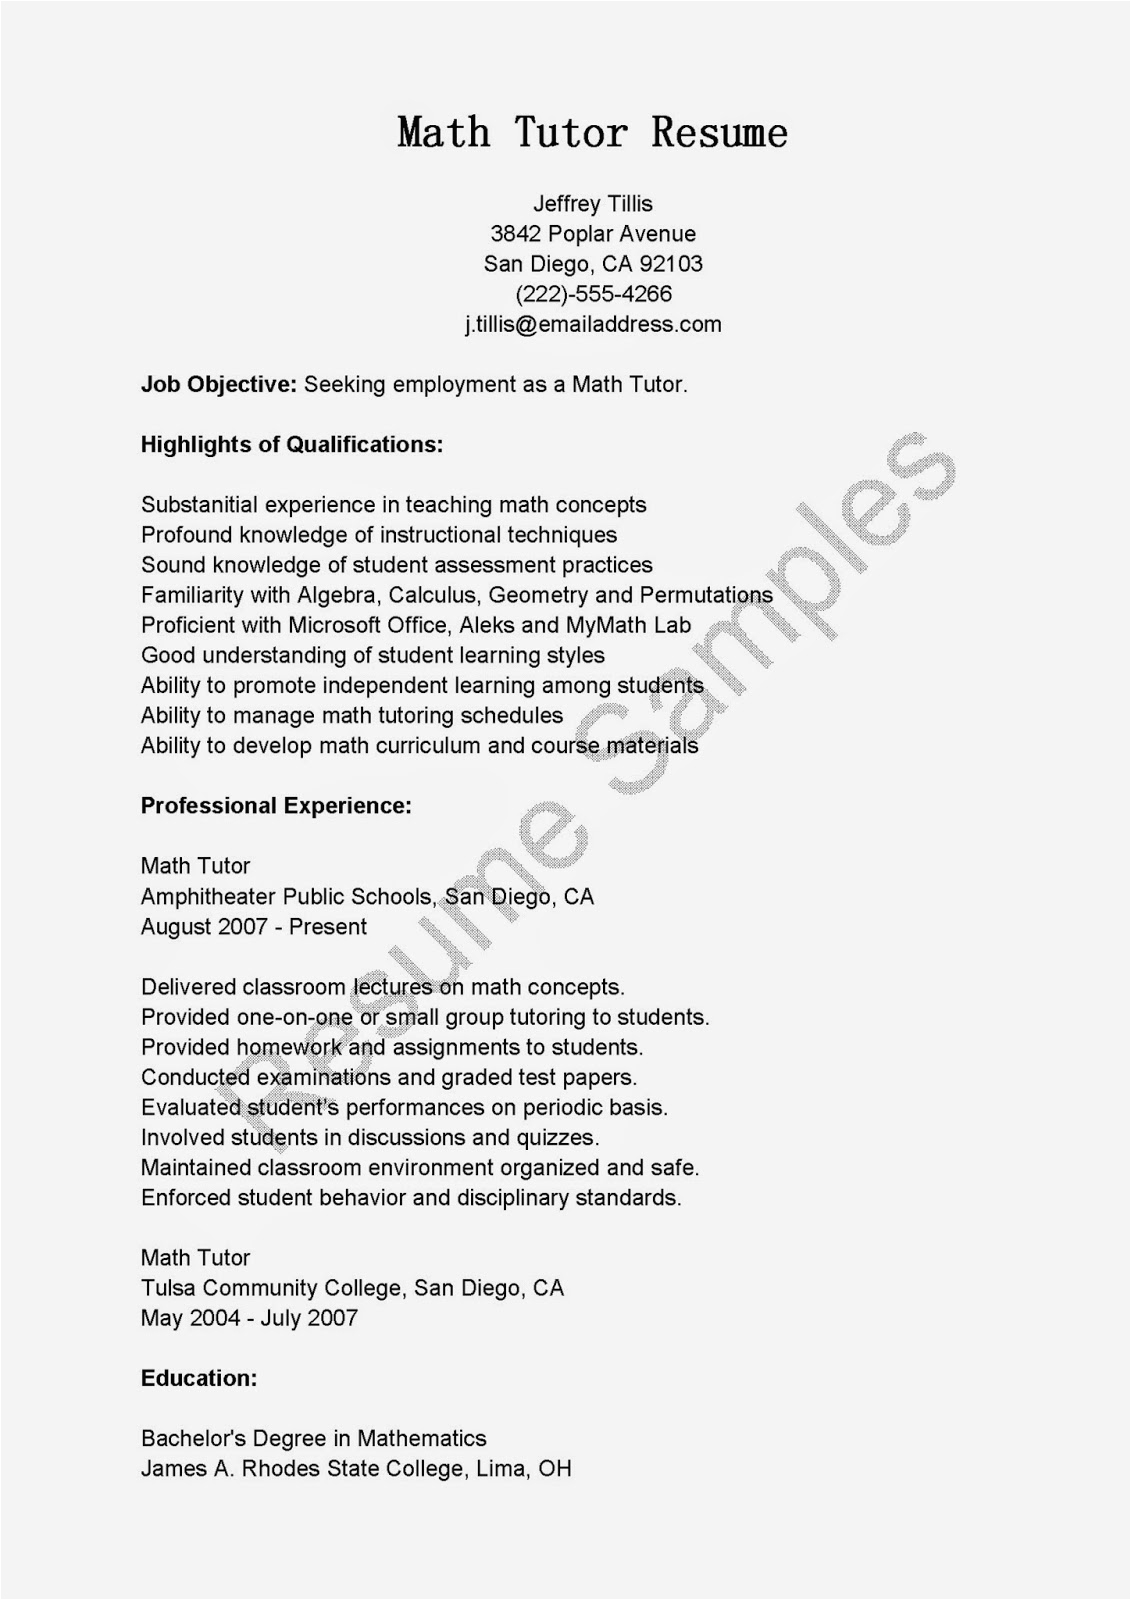 Math Tutor Sample Resume without Experience Resume Samples Math Tutor Resume Sample